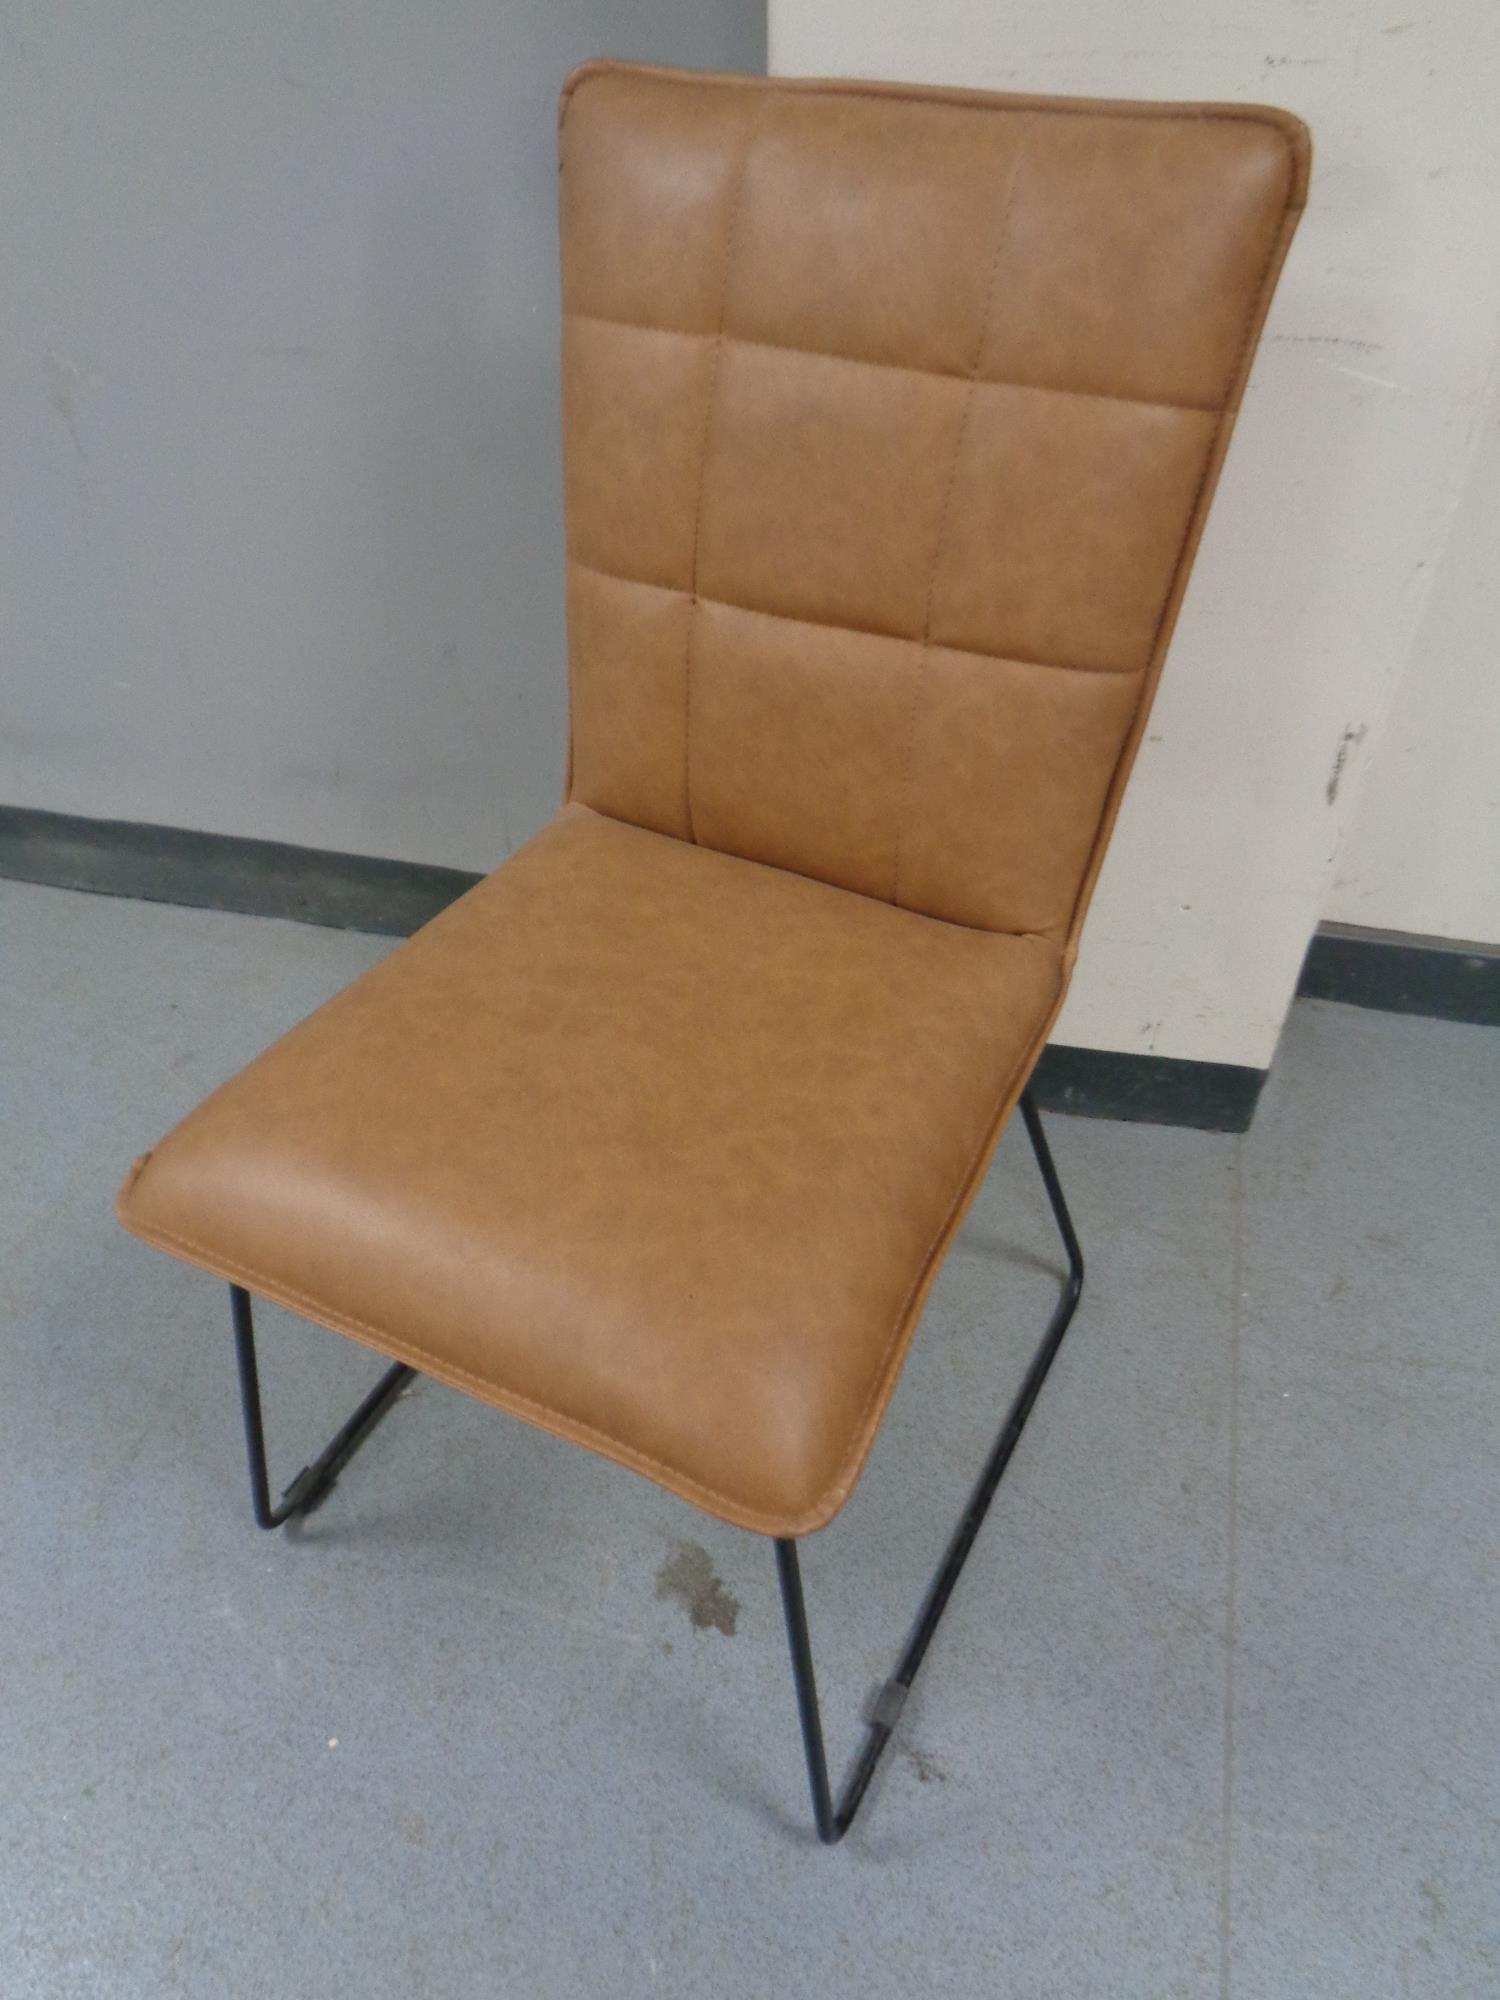 A contemporary brown leather dining chair on metal legs